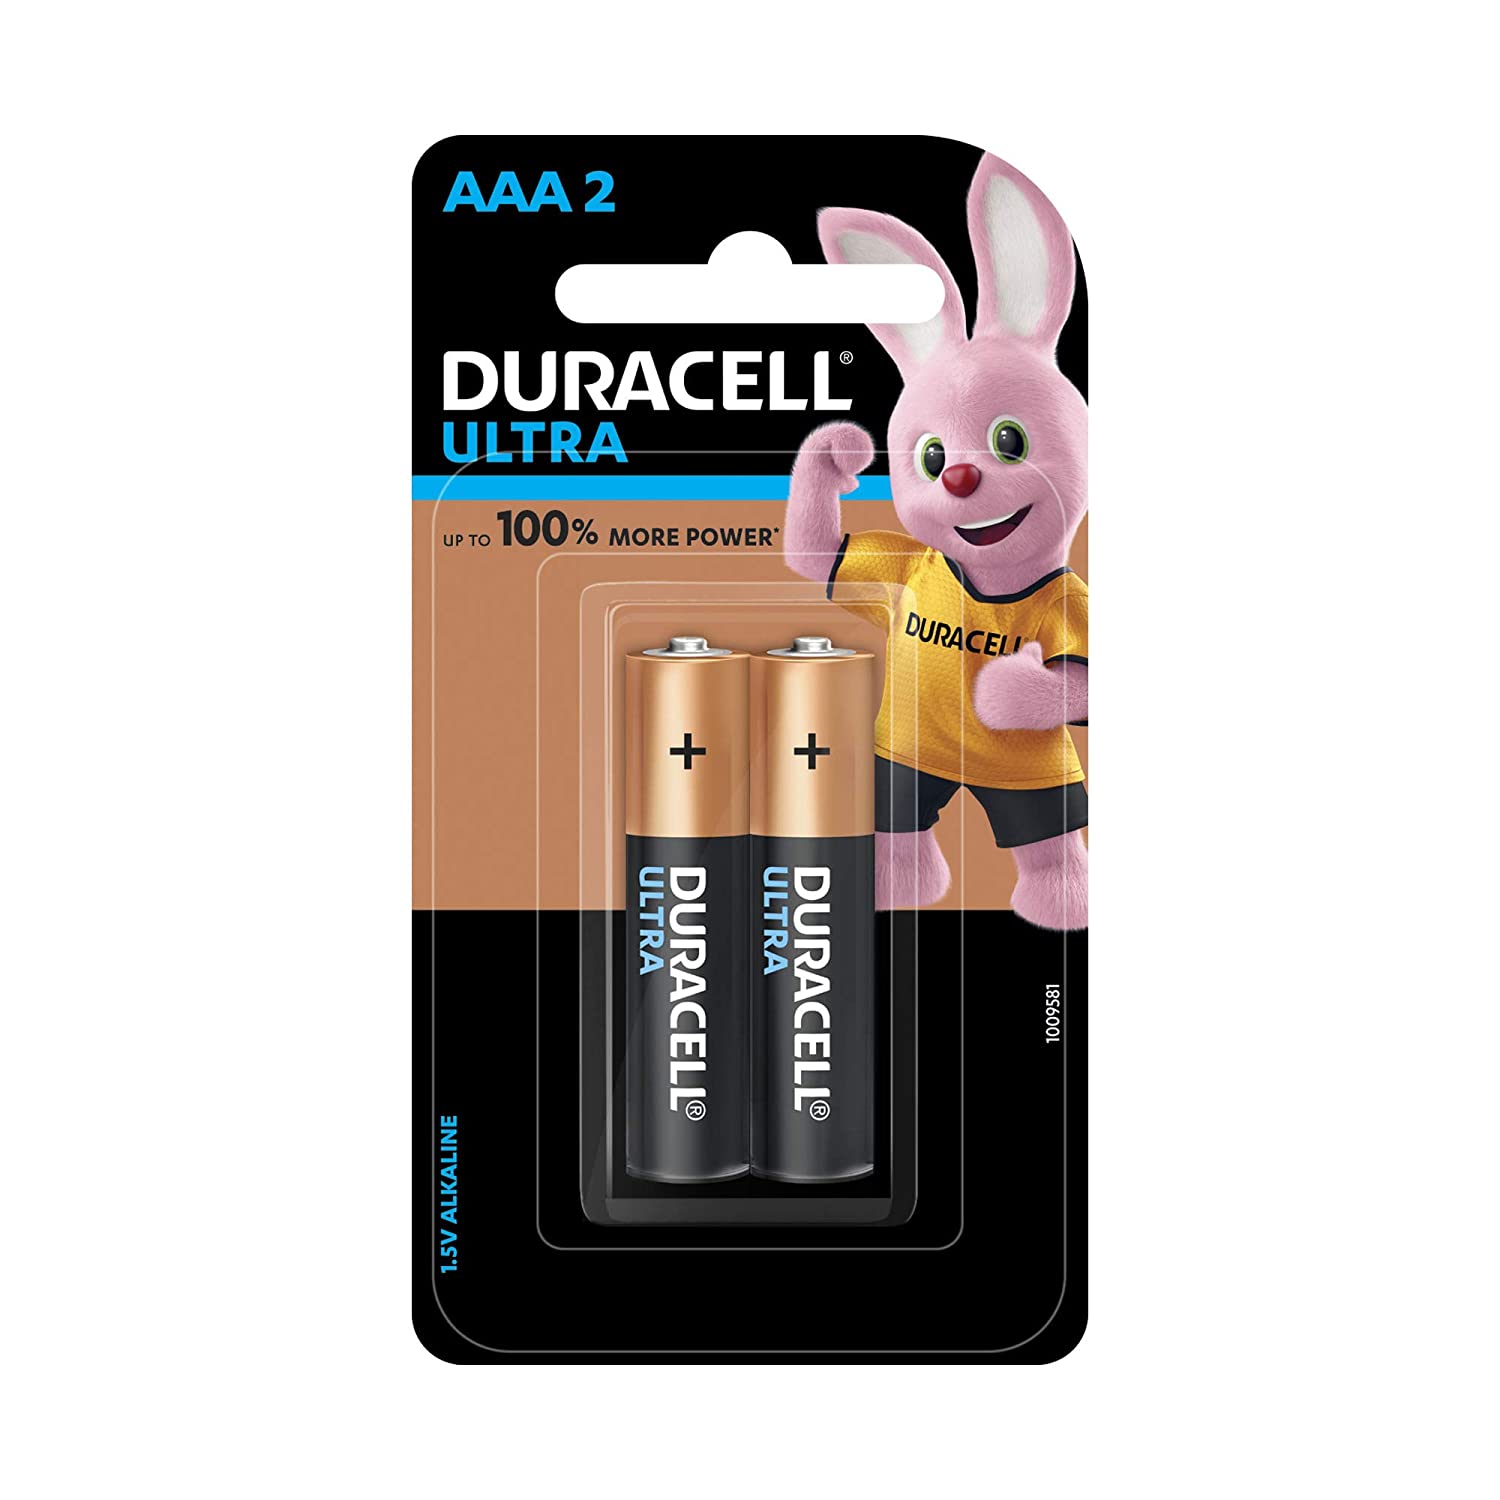 Duracell Ultra Alkaline AAA Battery, 2 Pieces - Pack of 8